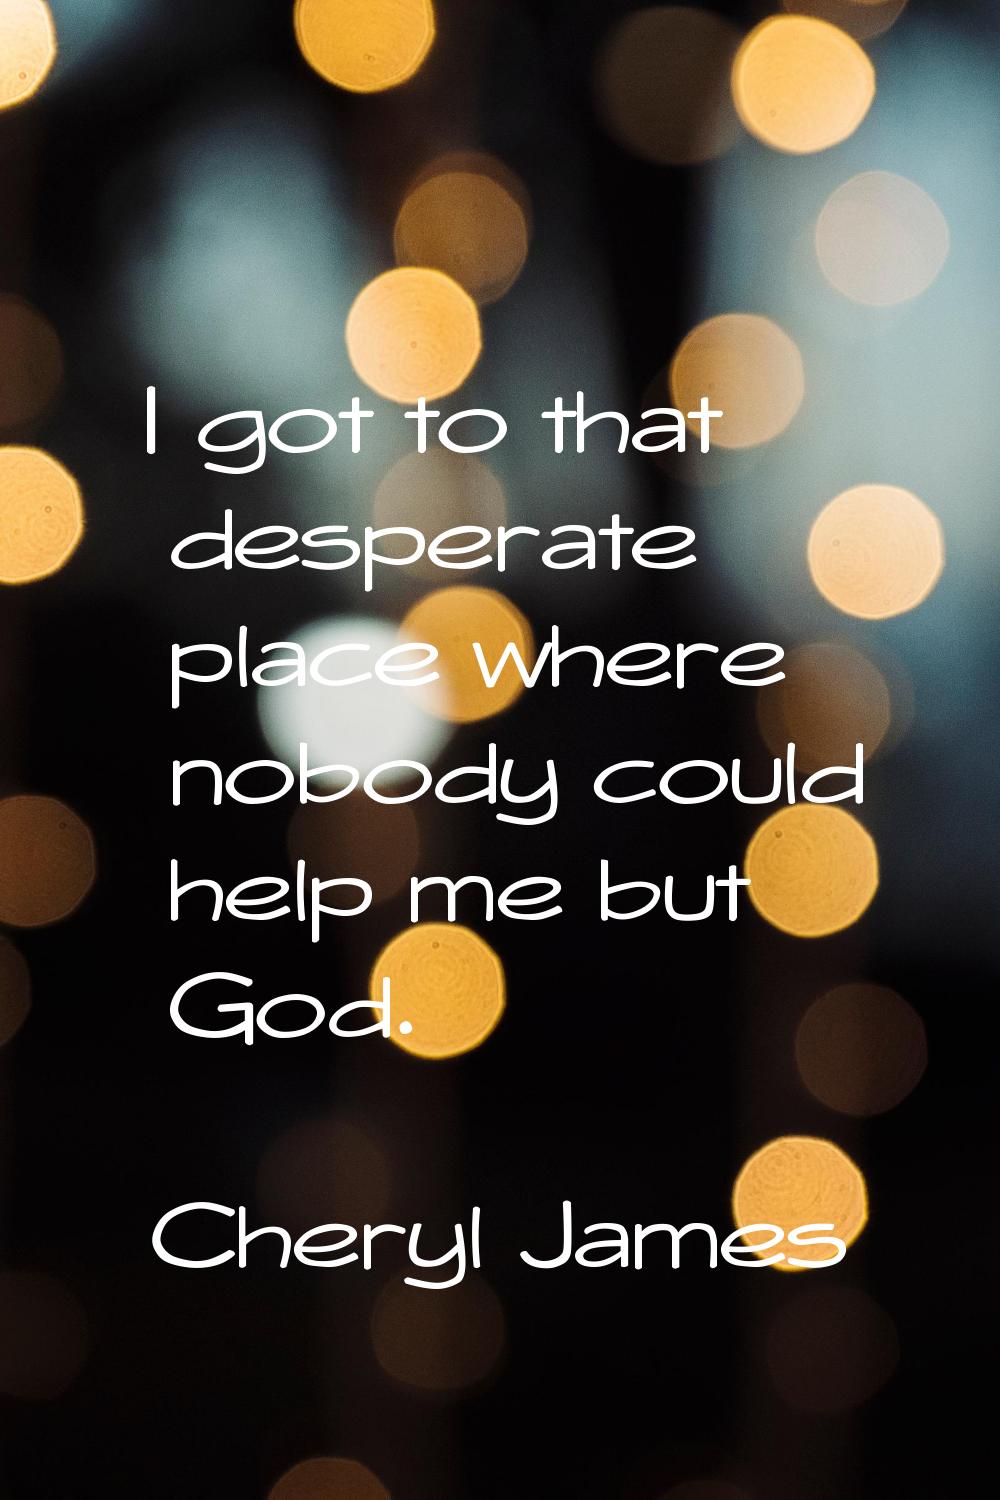 I got to that desperate place where nobody could help me but God.